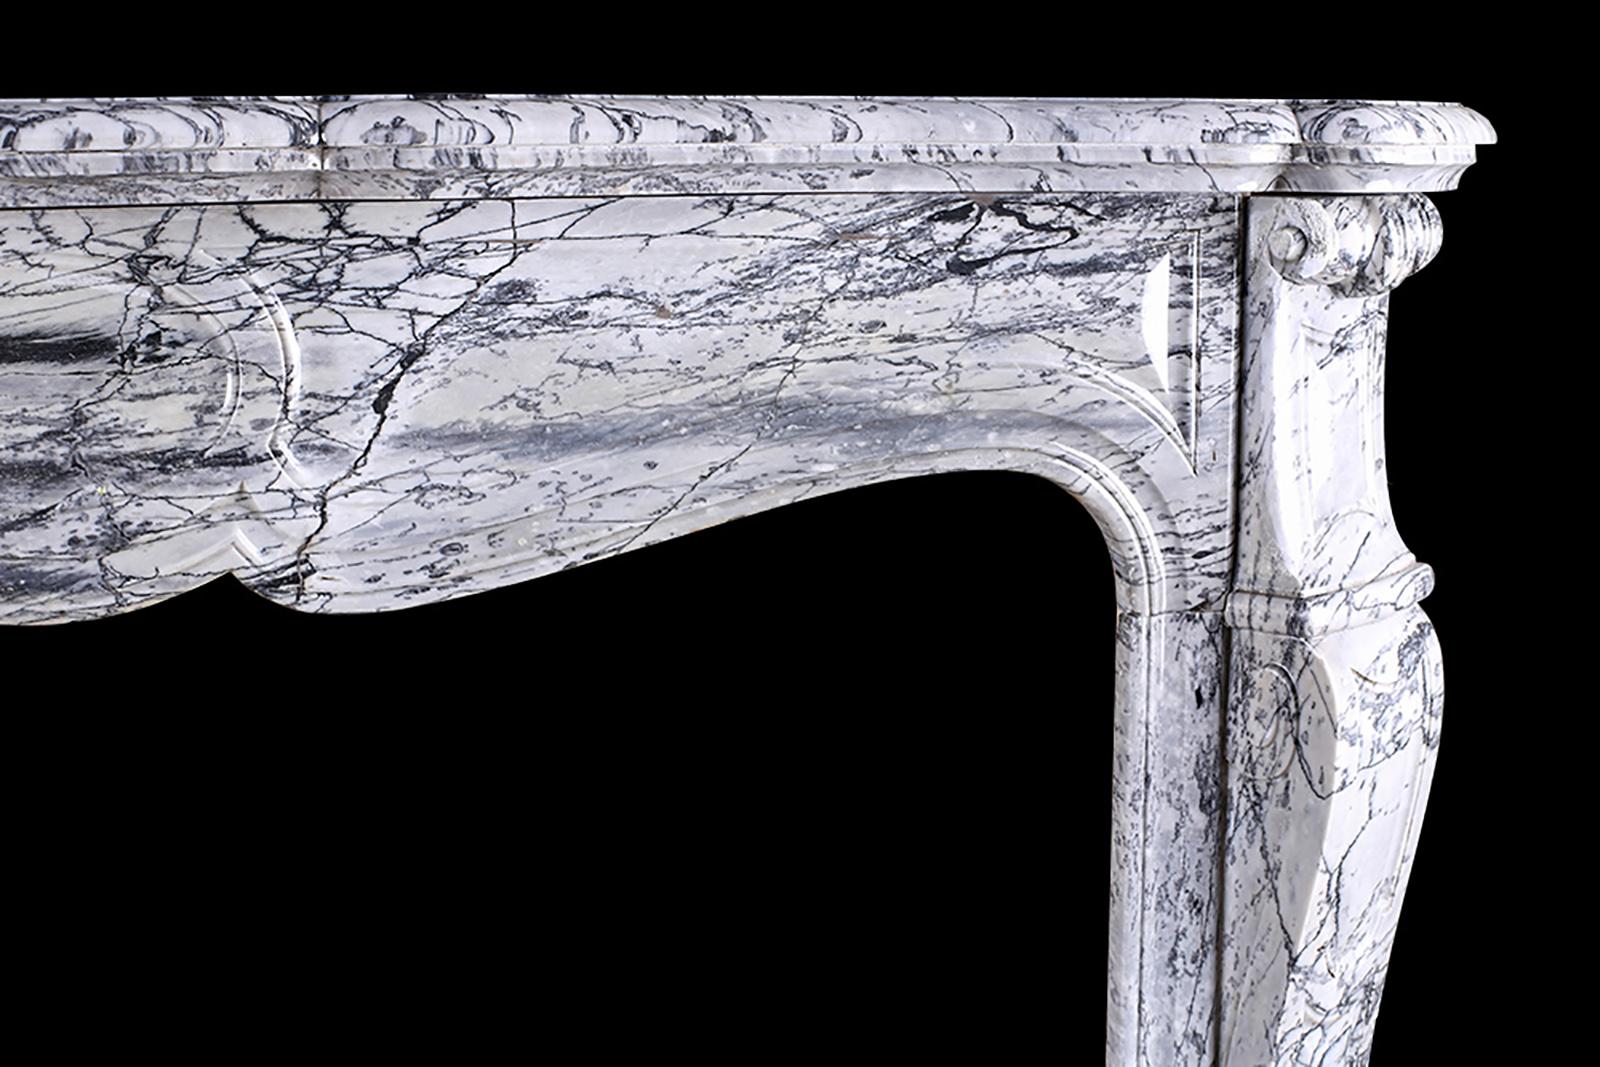 Antique Louis XV Pompadour fireplace mantel, Circa 1870

A Louis XV Pompadour antique fireplace mantel very finely carved in Italian grey veined white Carrara marble, with a serpentine shelf over the finely carved panelled frieze and decoratively